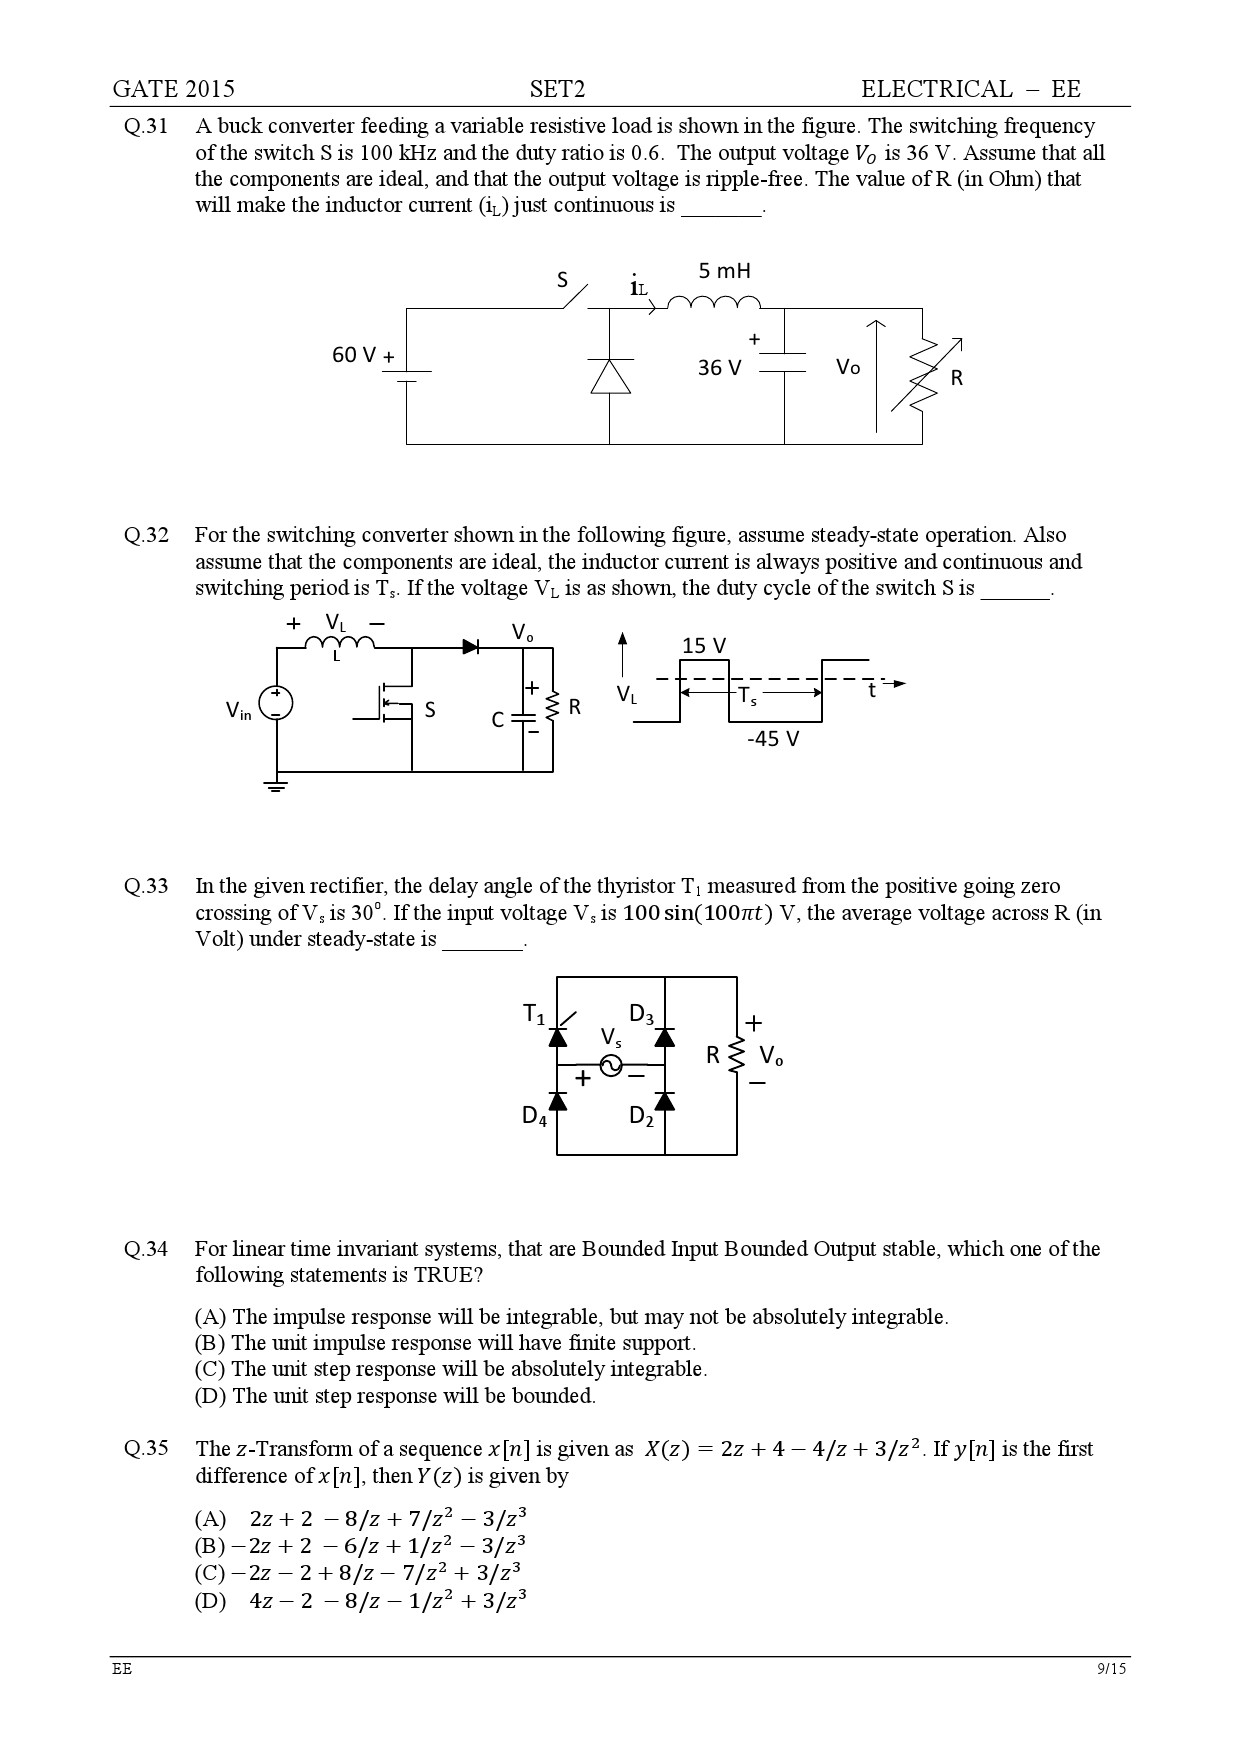 GATE Exam Question Paper 2015 Electrical Engineering Set 2 9